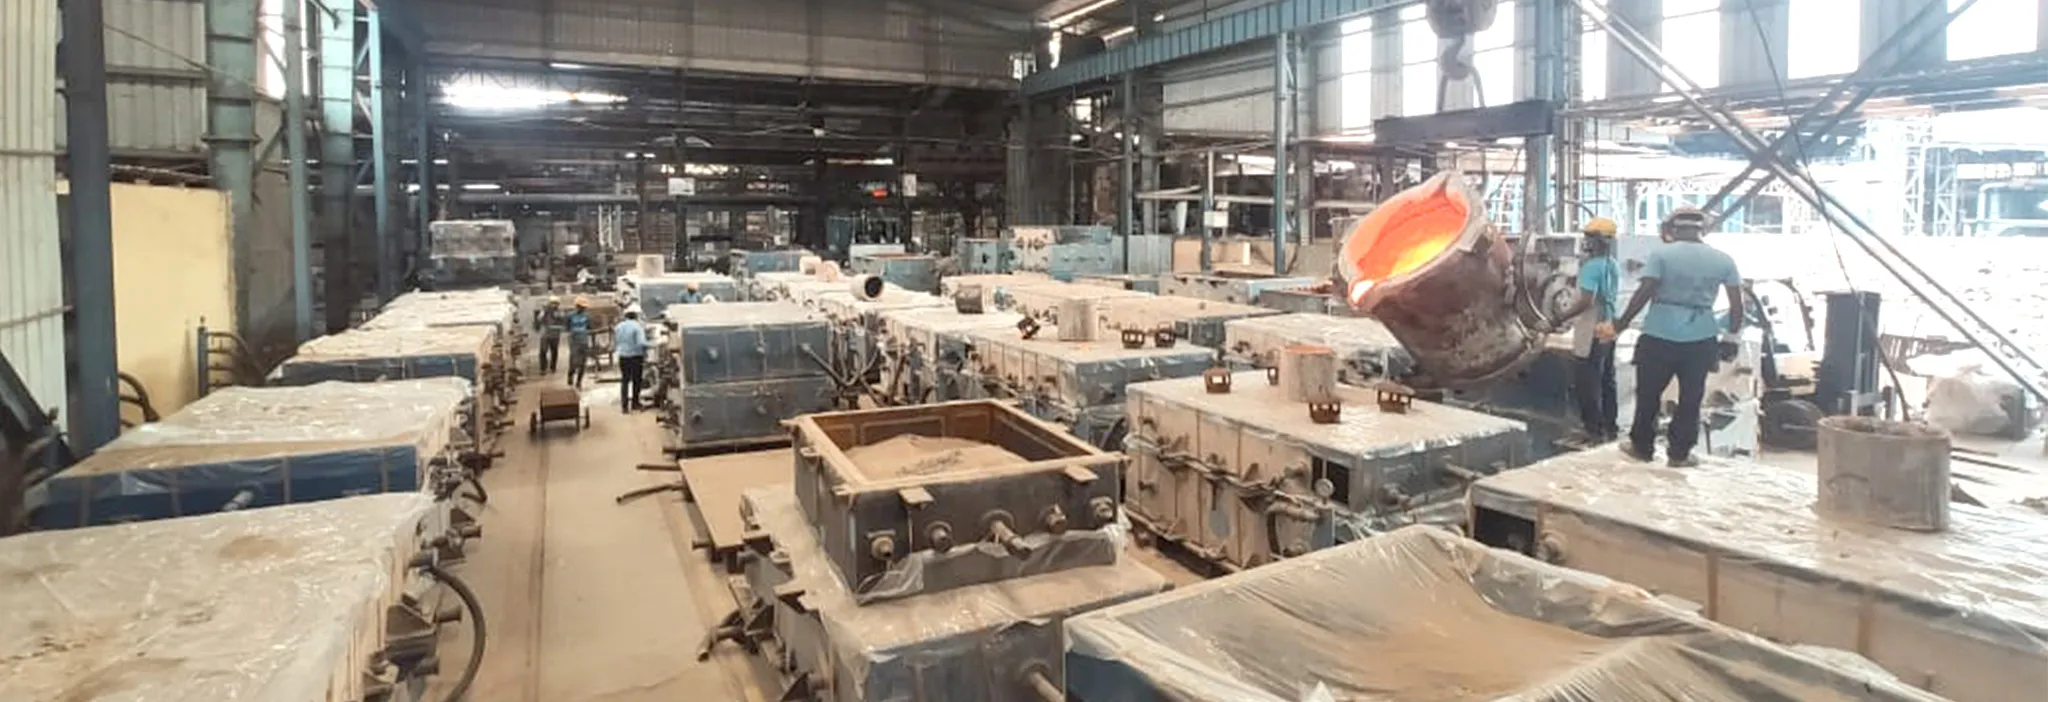 Inside Crescent Foundry during Casting